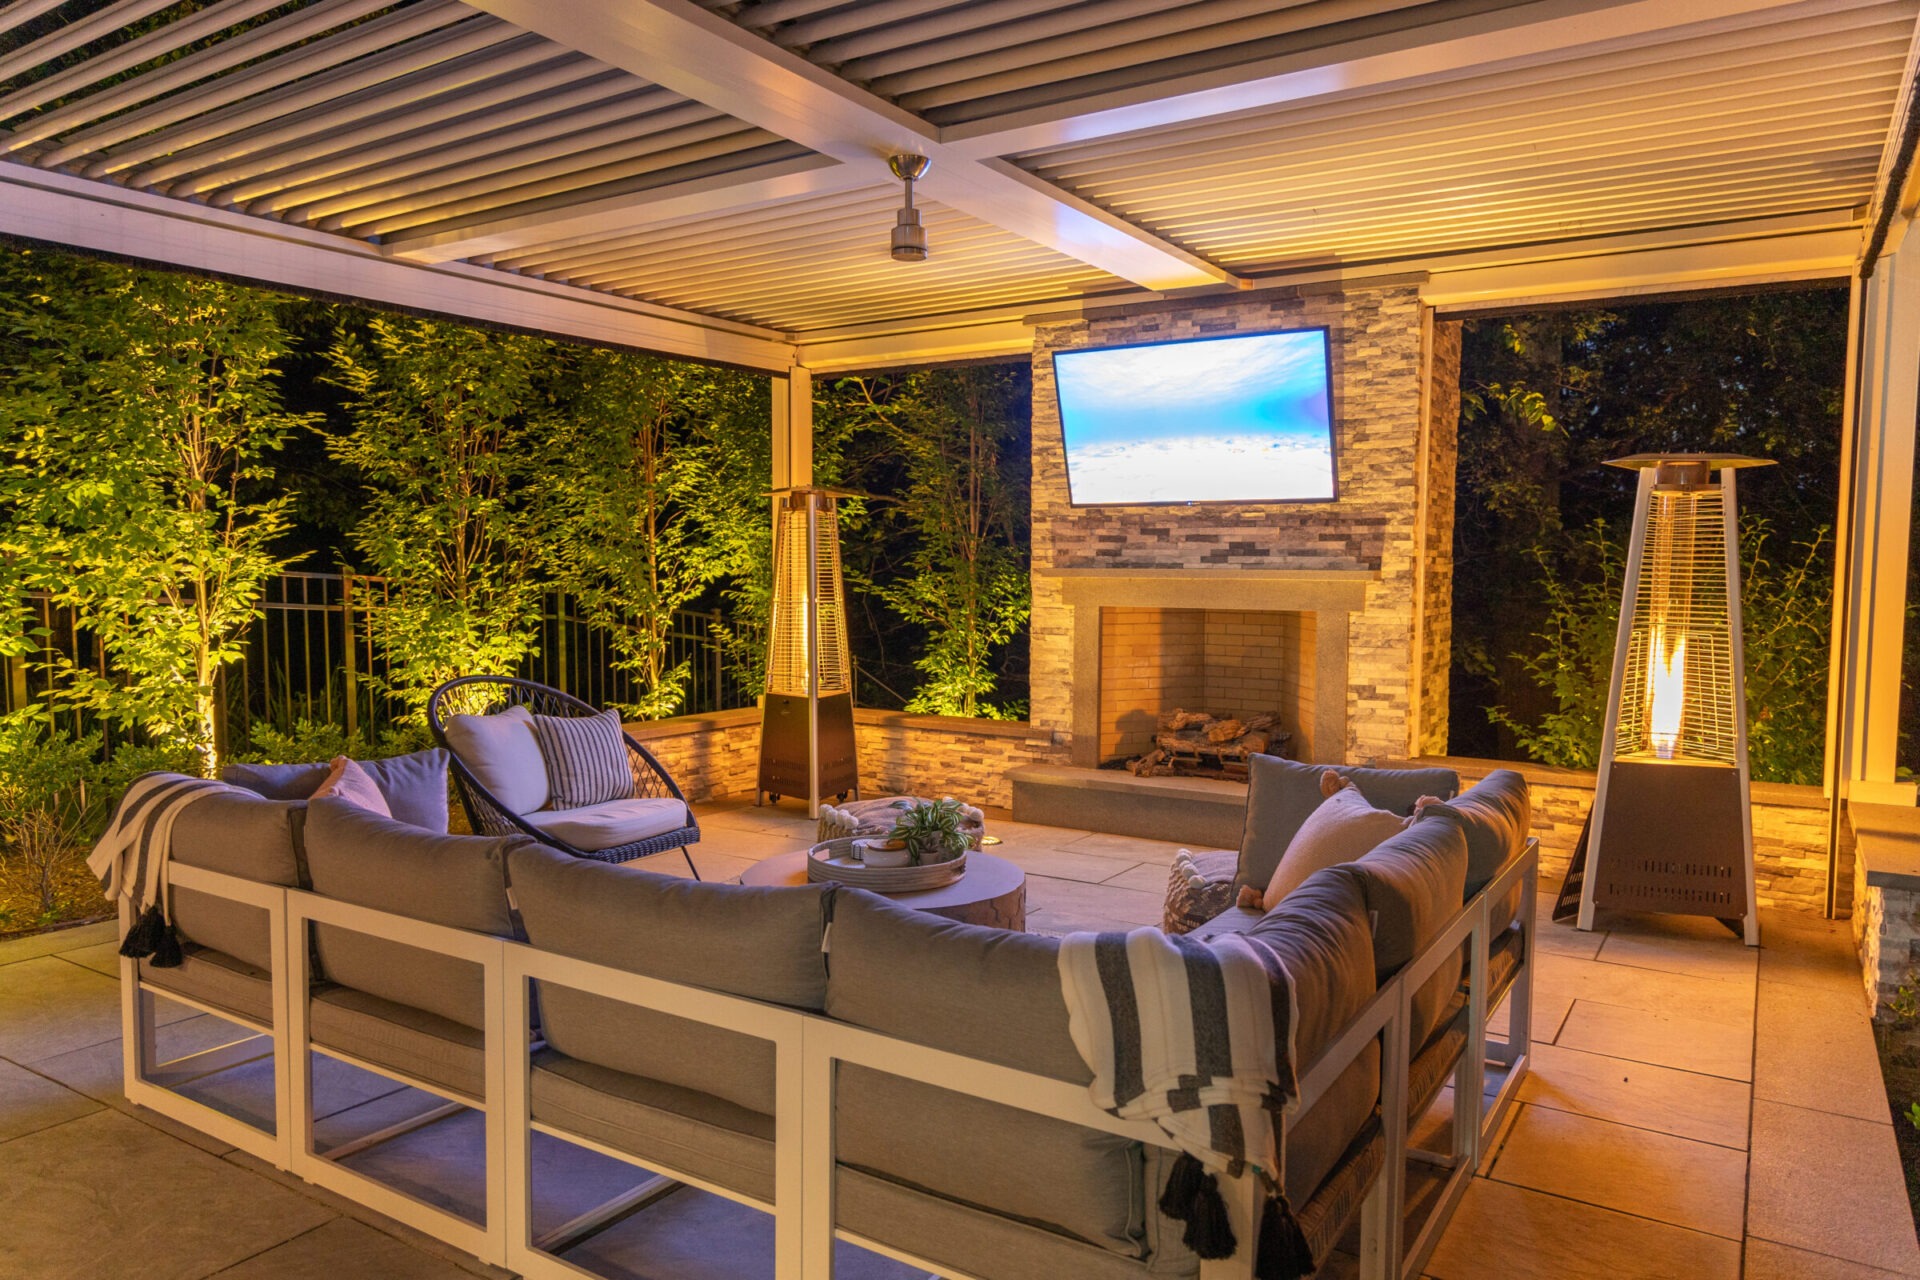 An outdoor living space at dusk with comfortable seating, a fireplace, television, heating lamps, and lush greenery visible beyond the pergola roof.